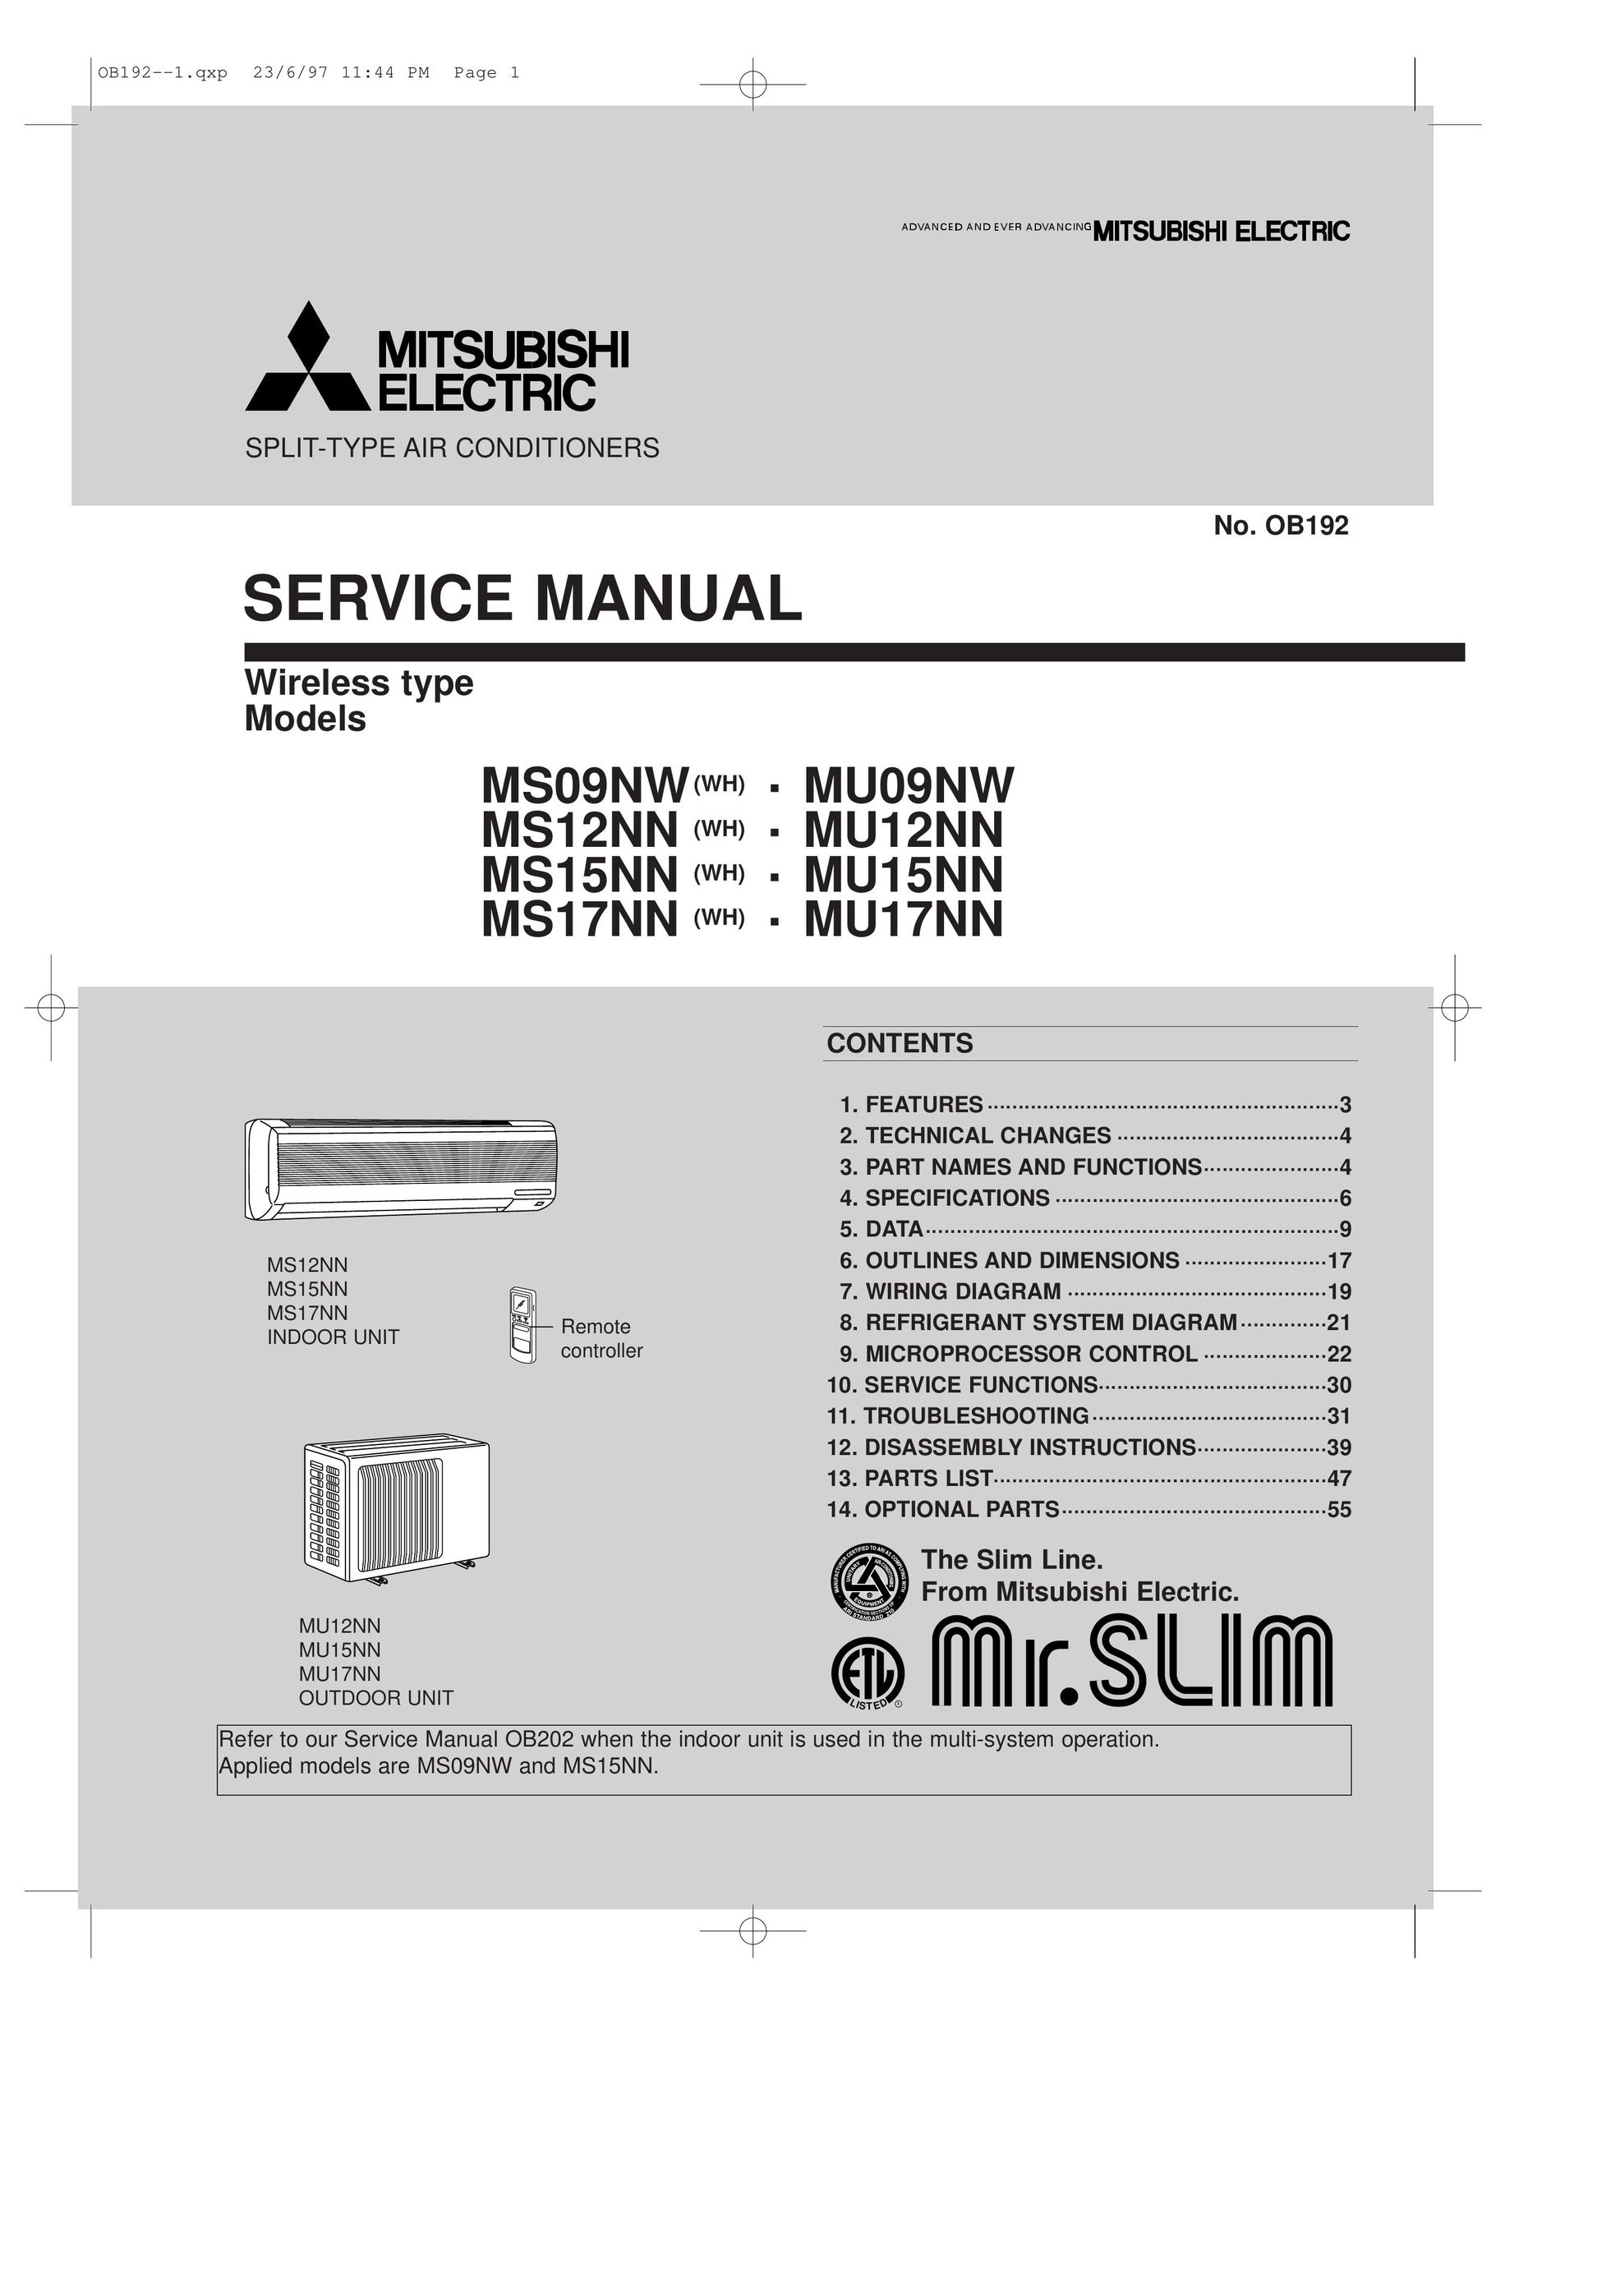 Mitsumi electronic MS15NN (WH) Air Conditioner User Manual